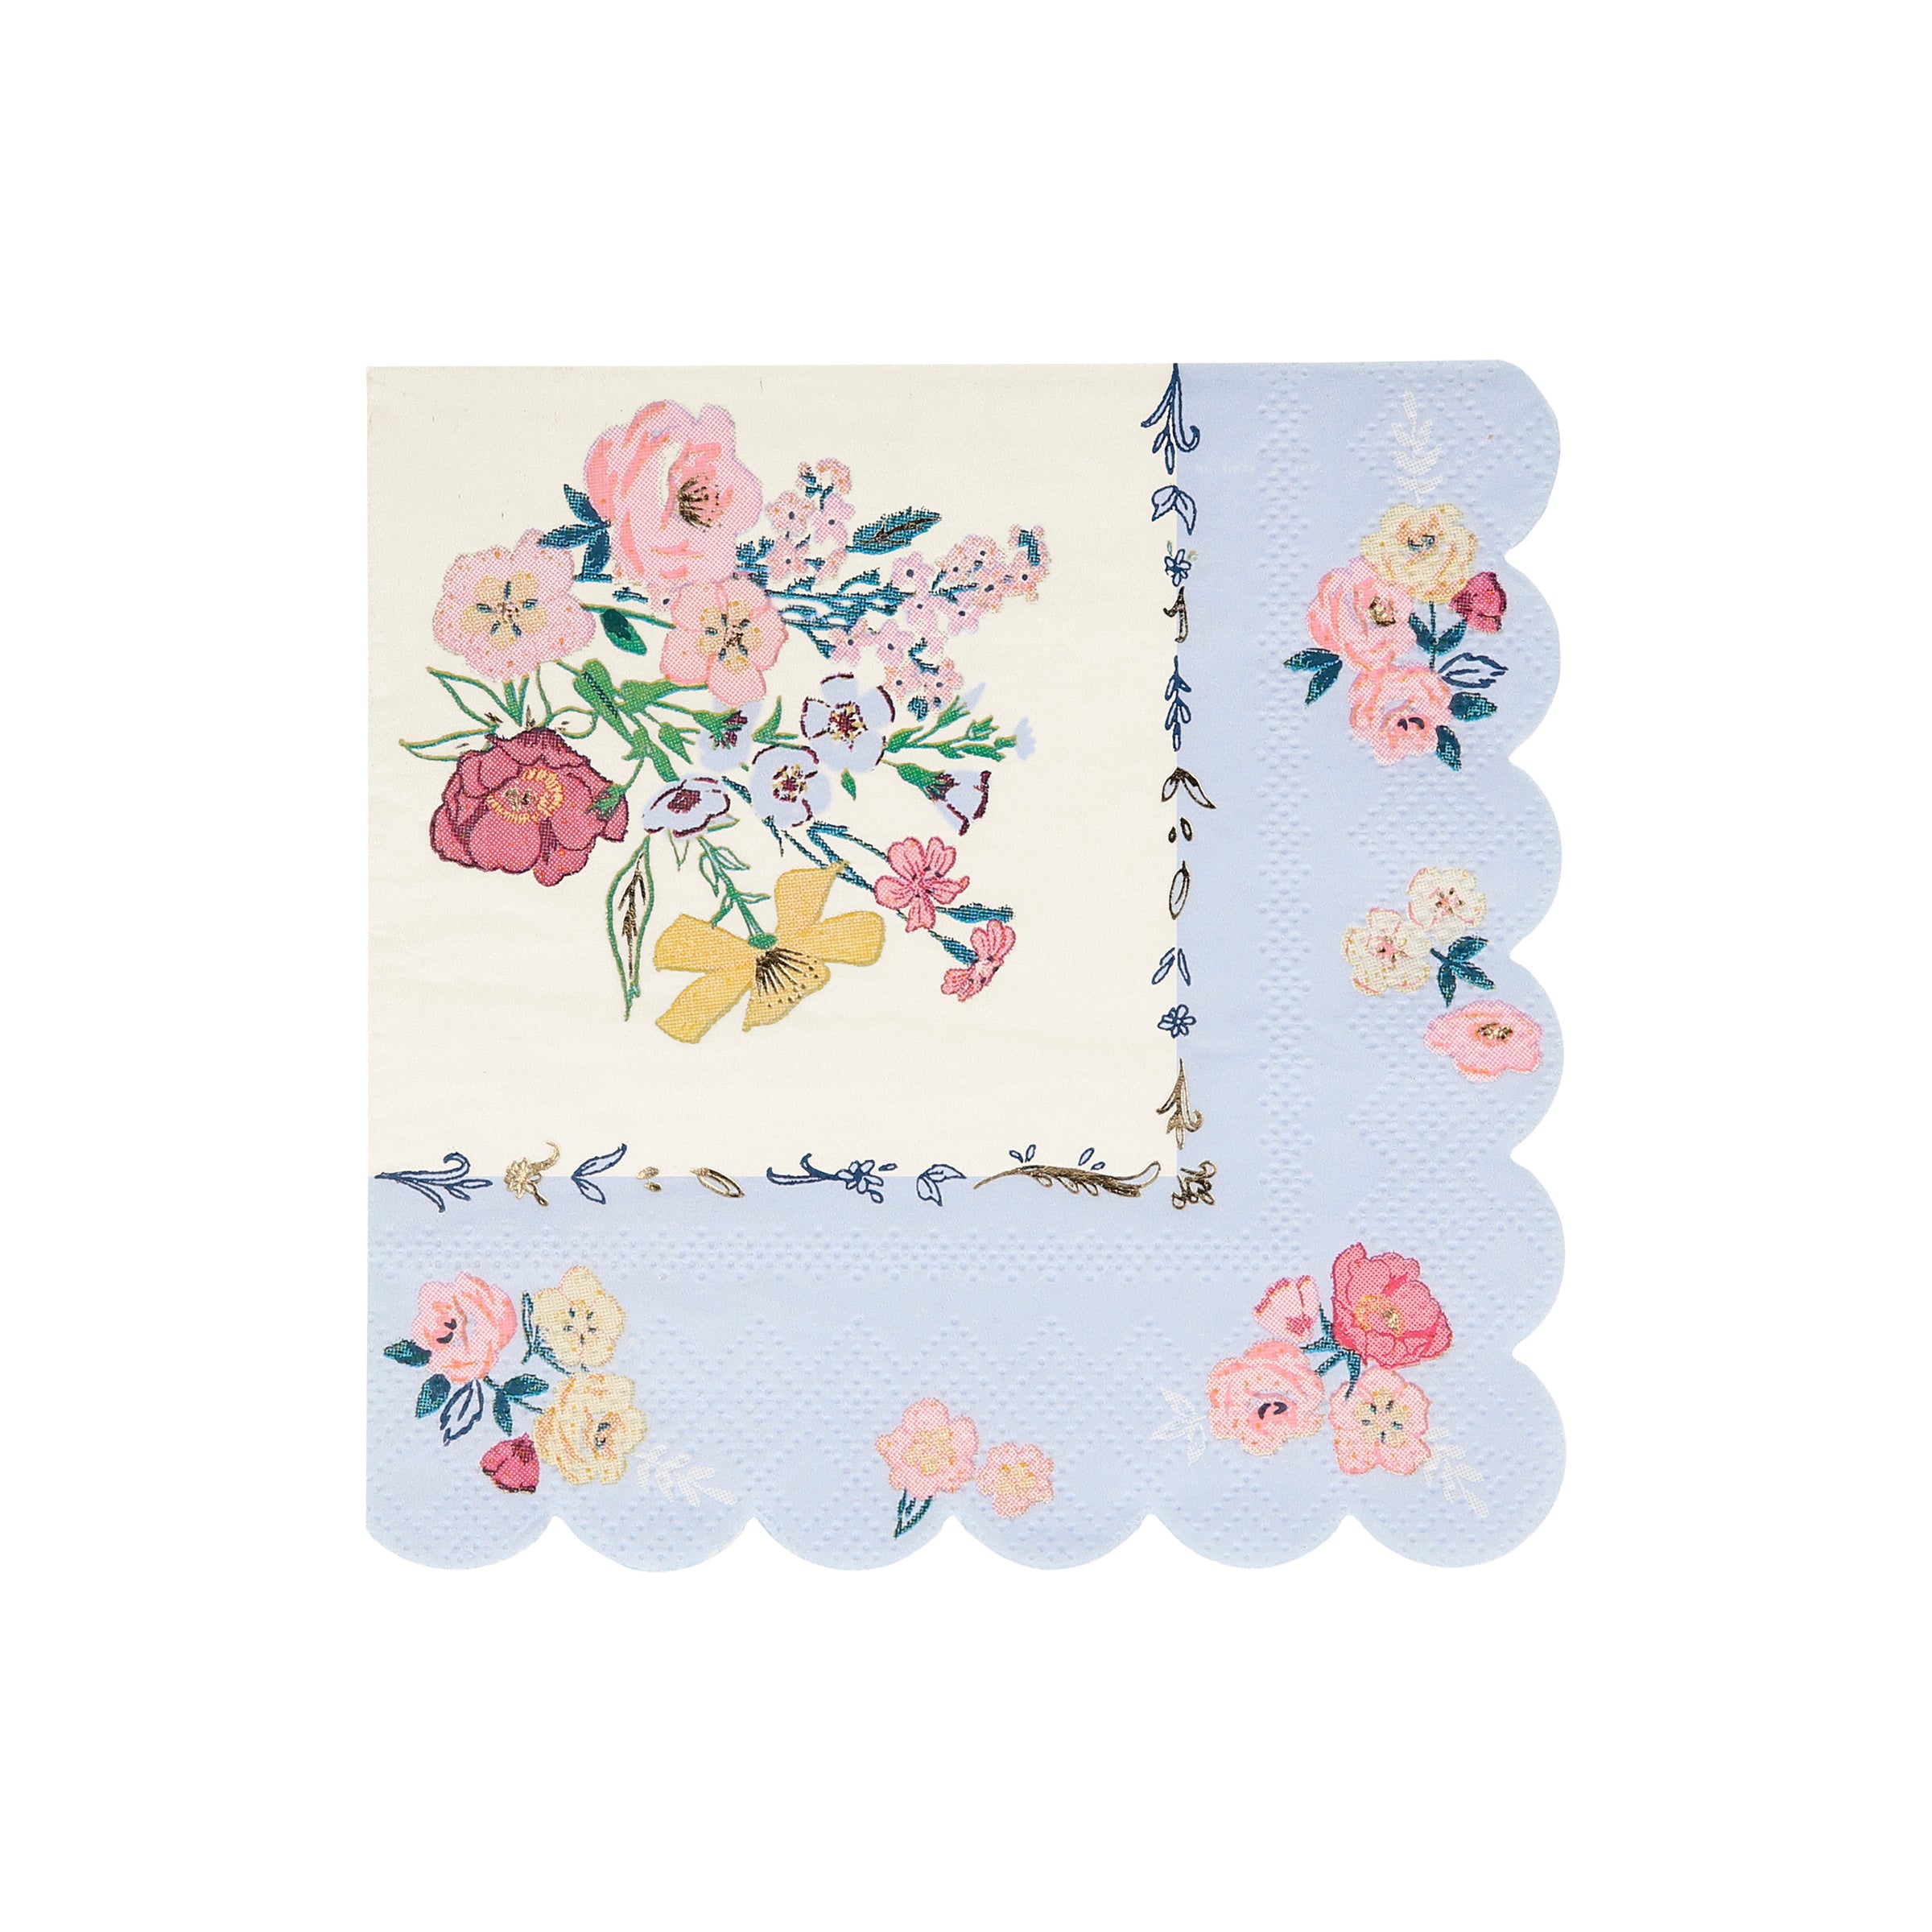 Our party napkins, with beautiful flowers, are ideal for a garden party or picnic.